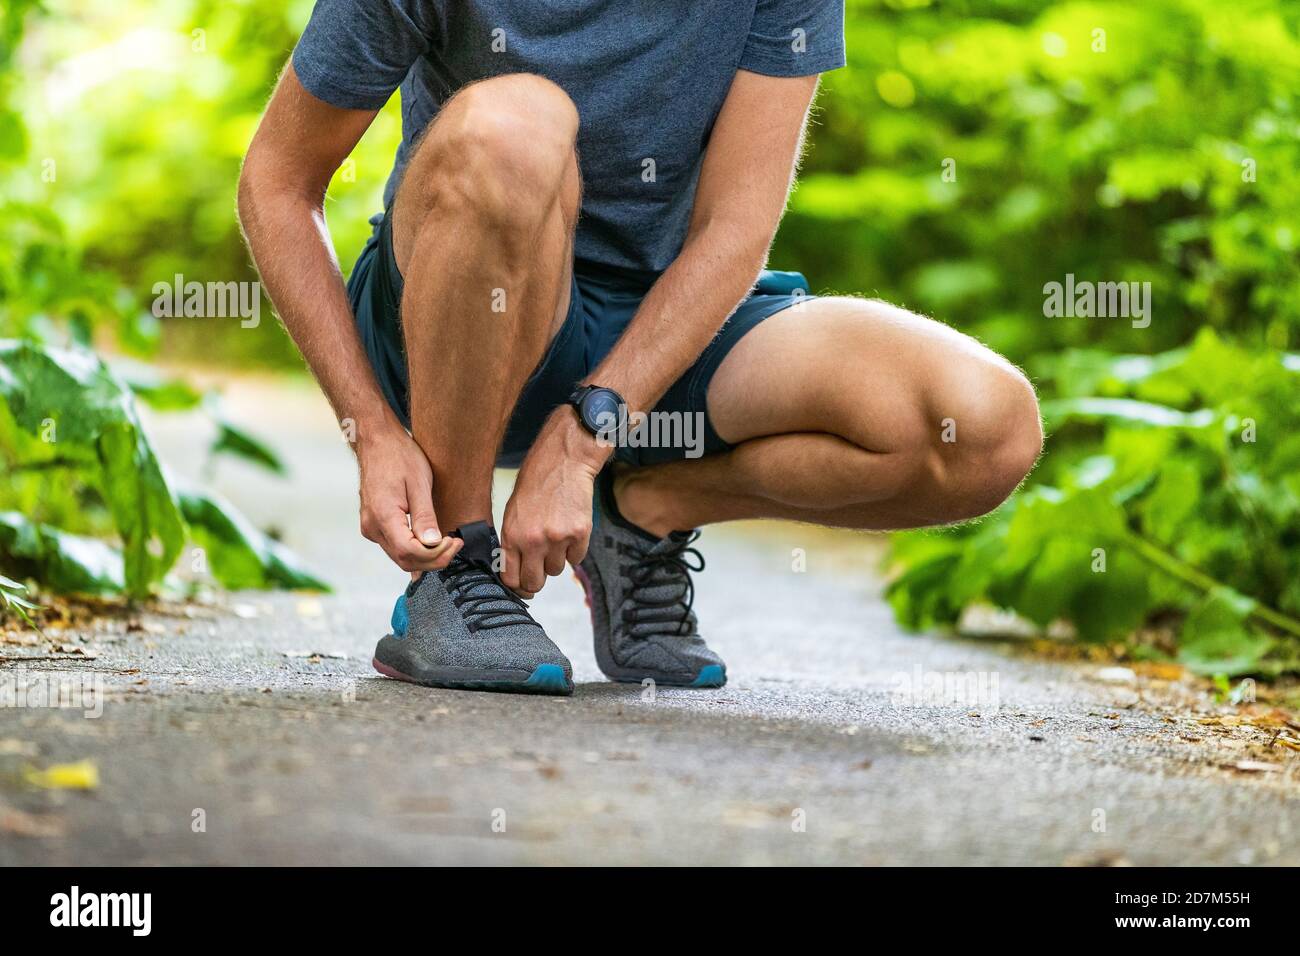 Running shoes sports smartwatch man tying shoe laces. Male fitness runner getting ready to jog in spring autumn jogging outdoor wearing technology Stock Photo